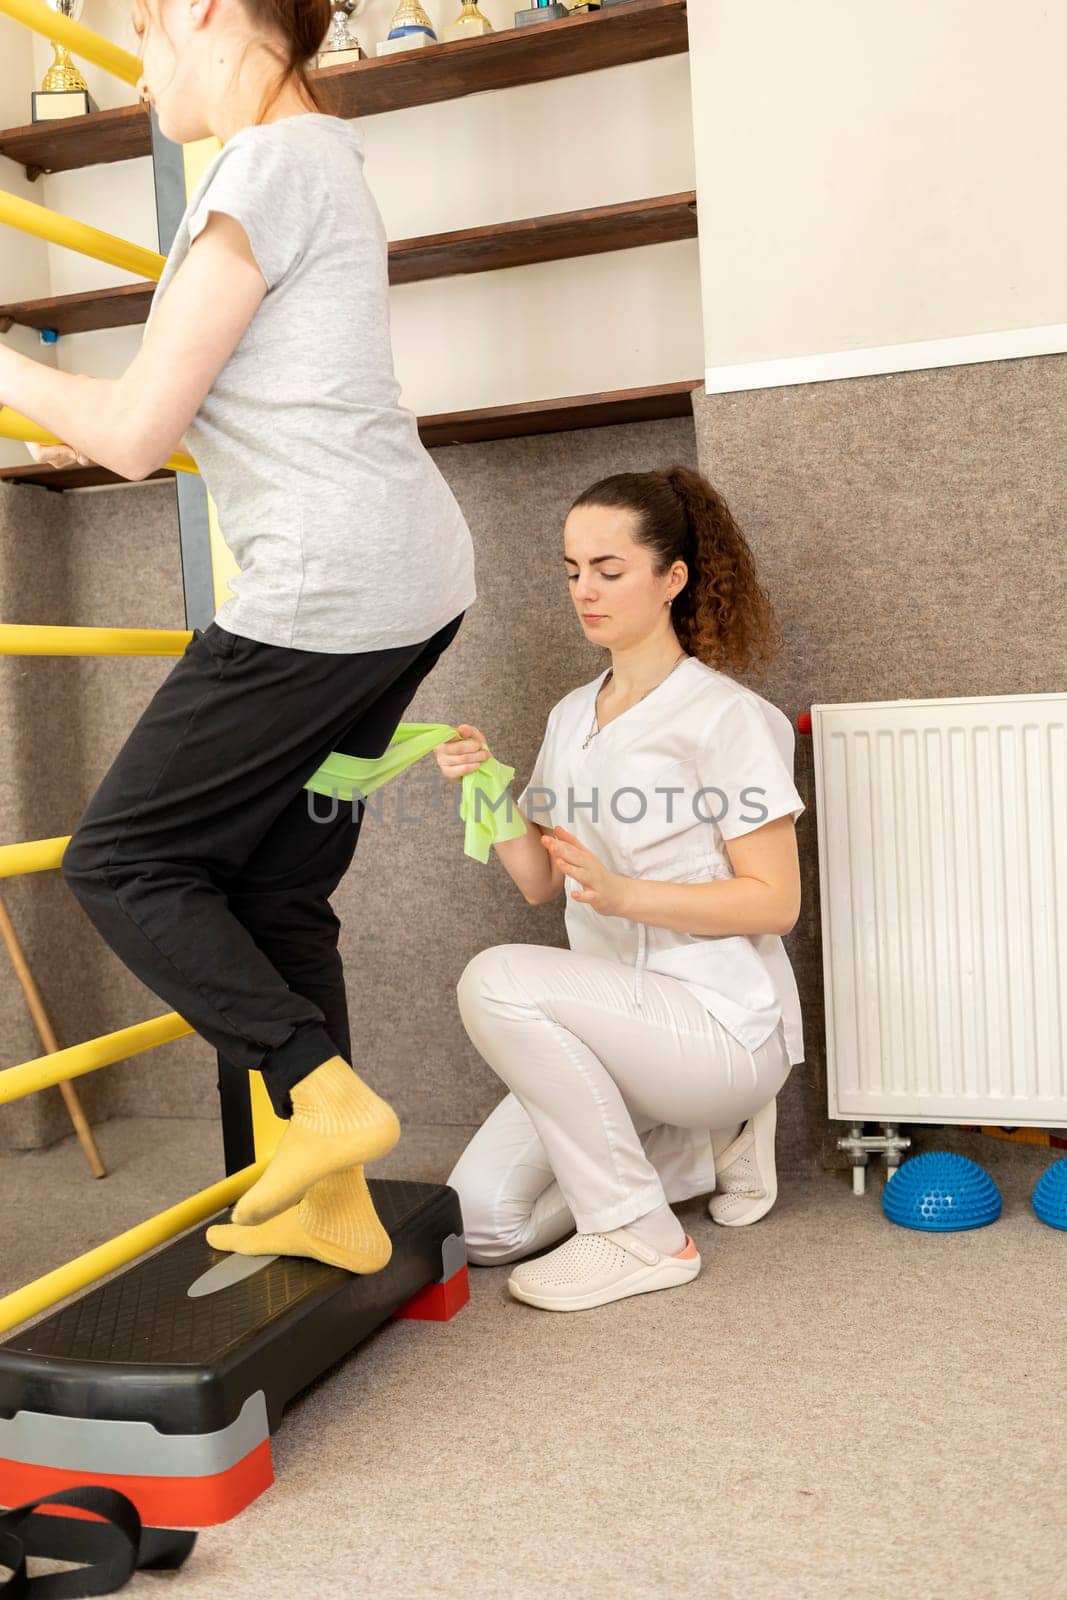 Disabled Child With Doctor Does Physical Exercises Near Gymnastic Wall In Rehabilitation Room. Kid With Special Needs. Rehabilitation. Cerebral Palsy. Motor Disorder. Vertical plane.High quality photo